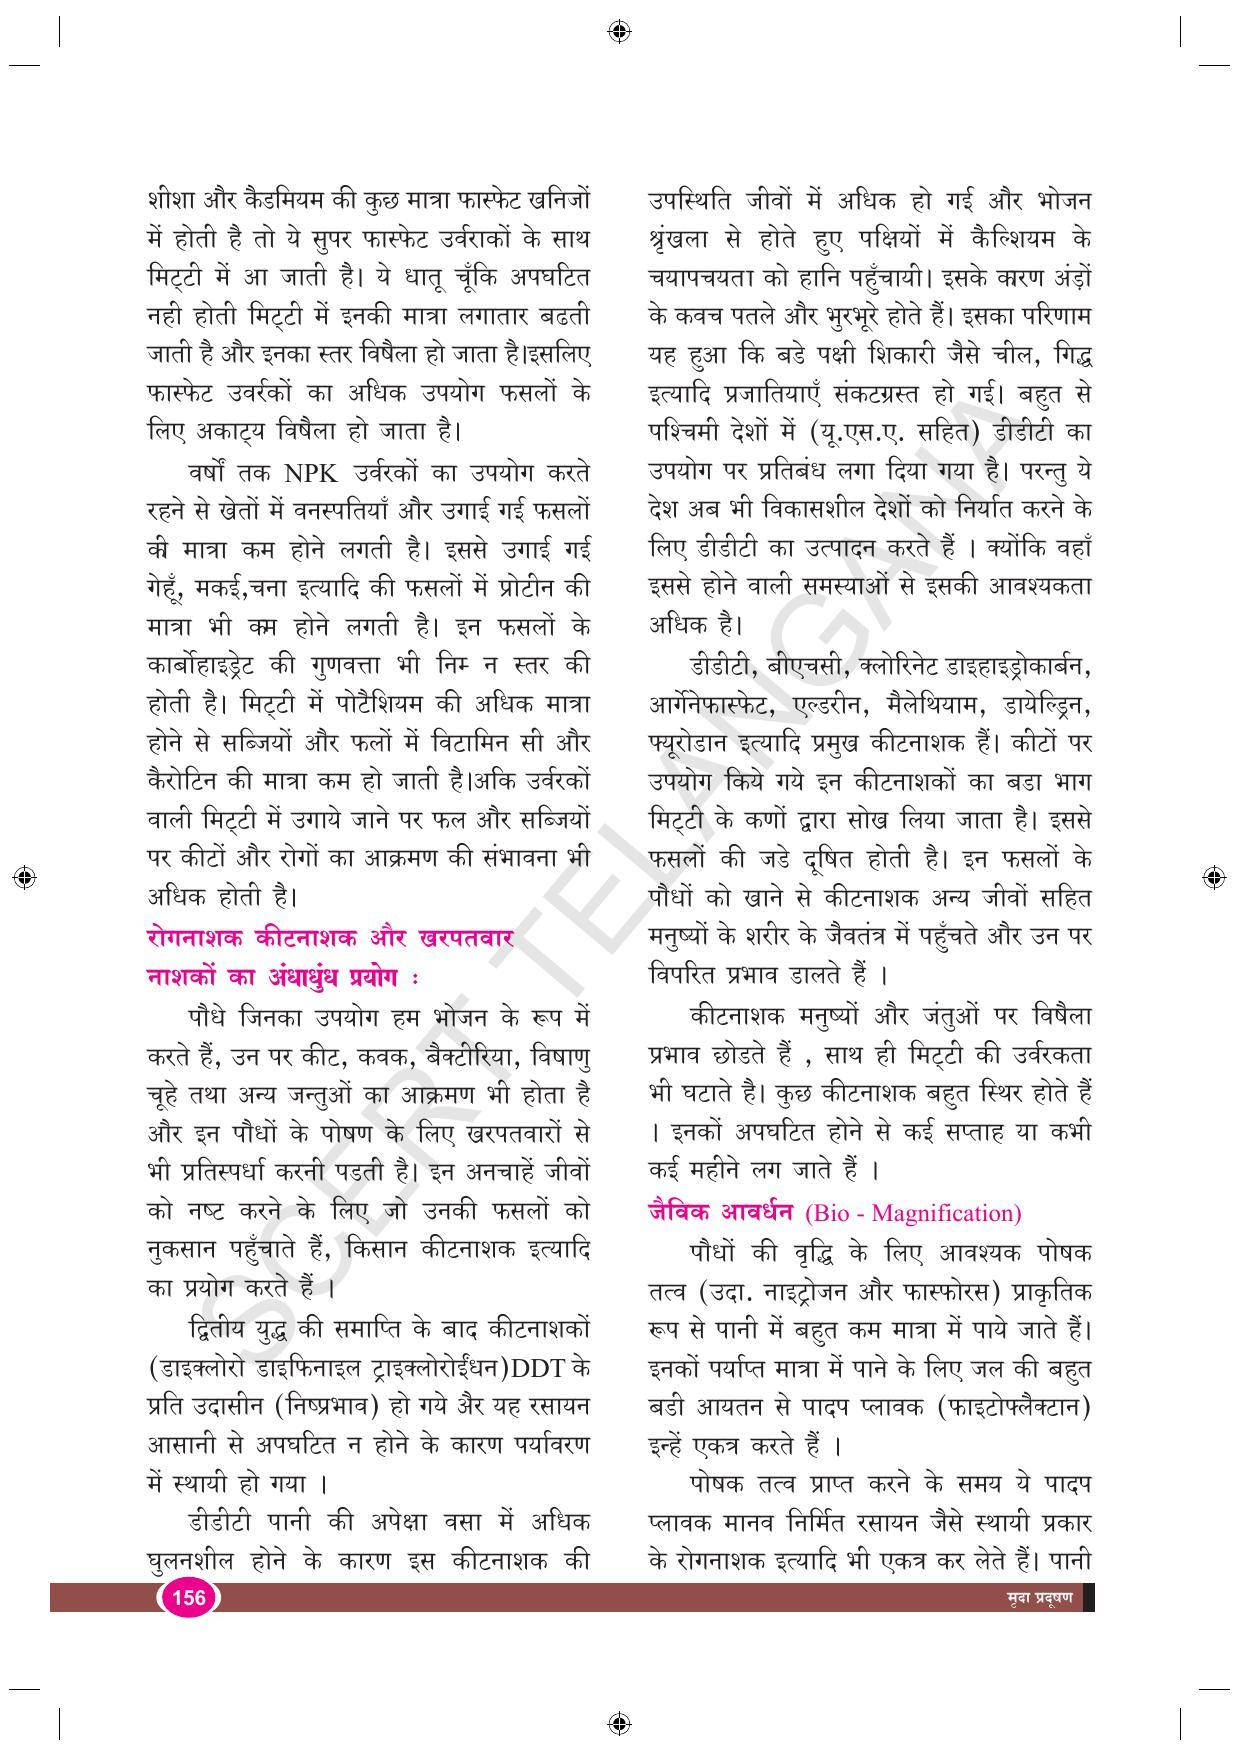 TS SCERT Class 9 Biological Science (Hindi Medium) Text Book - Page 168